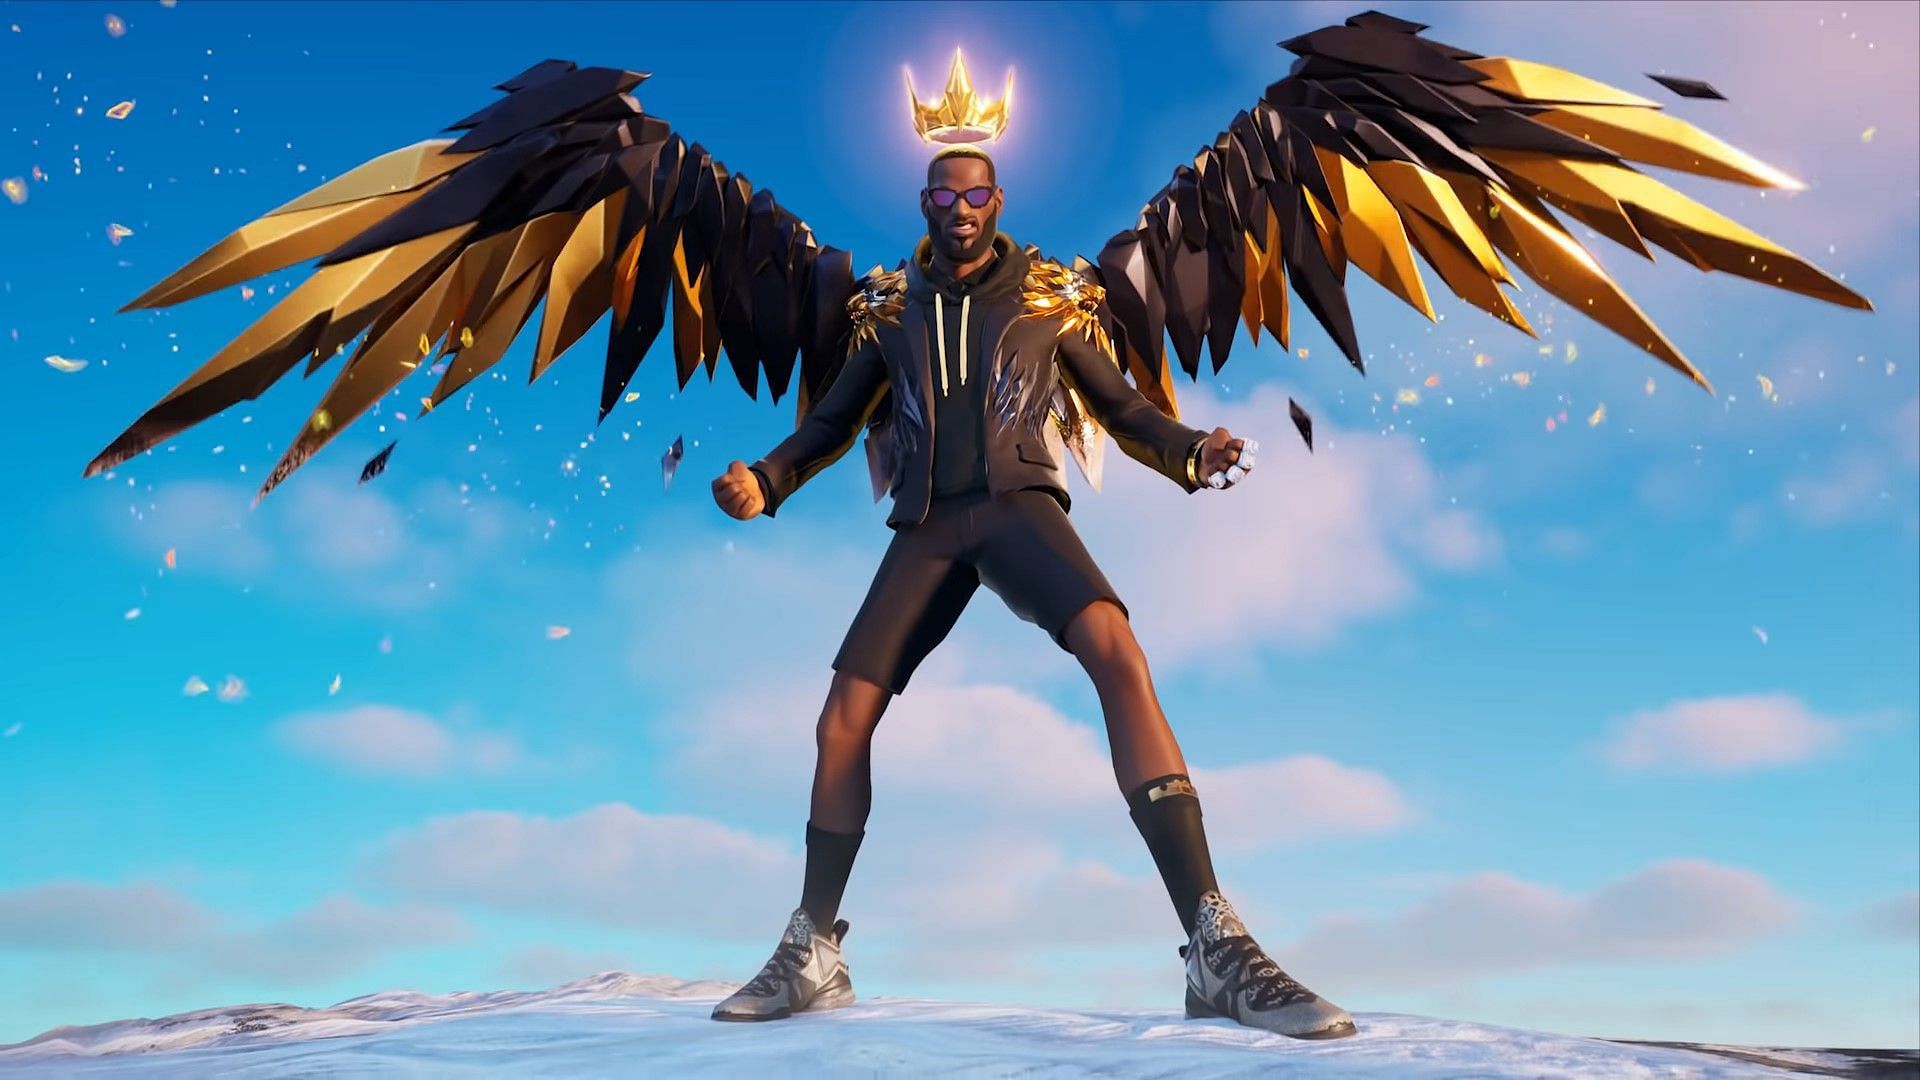 LeBron has millions of fans from all around the world (Image via Epic Games)